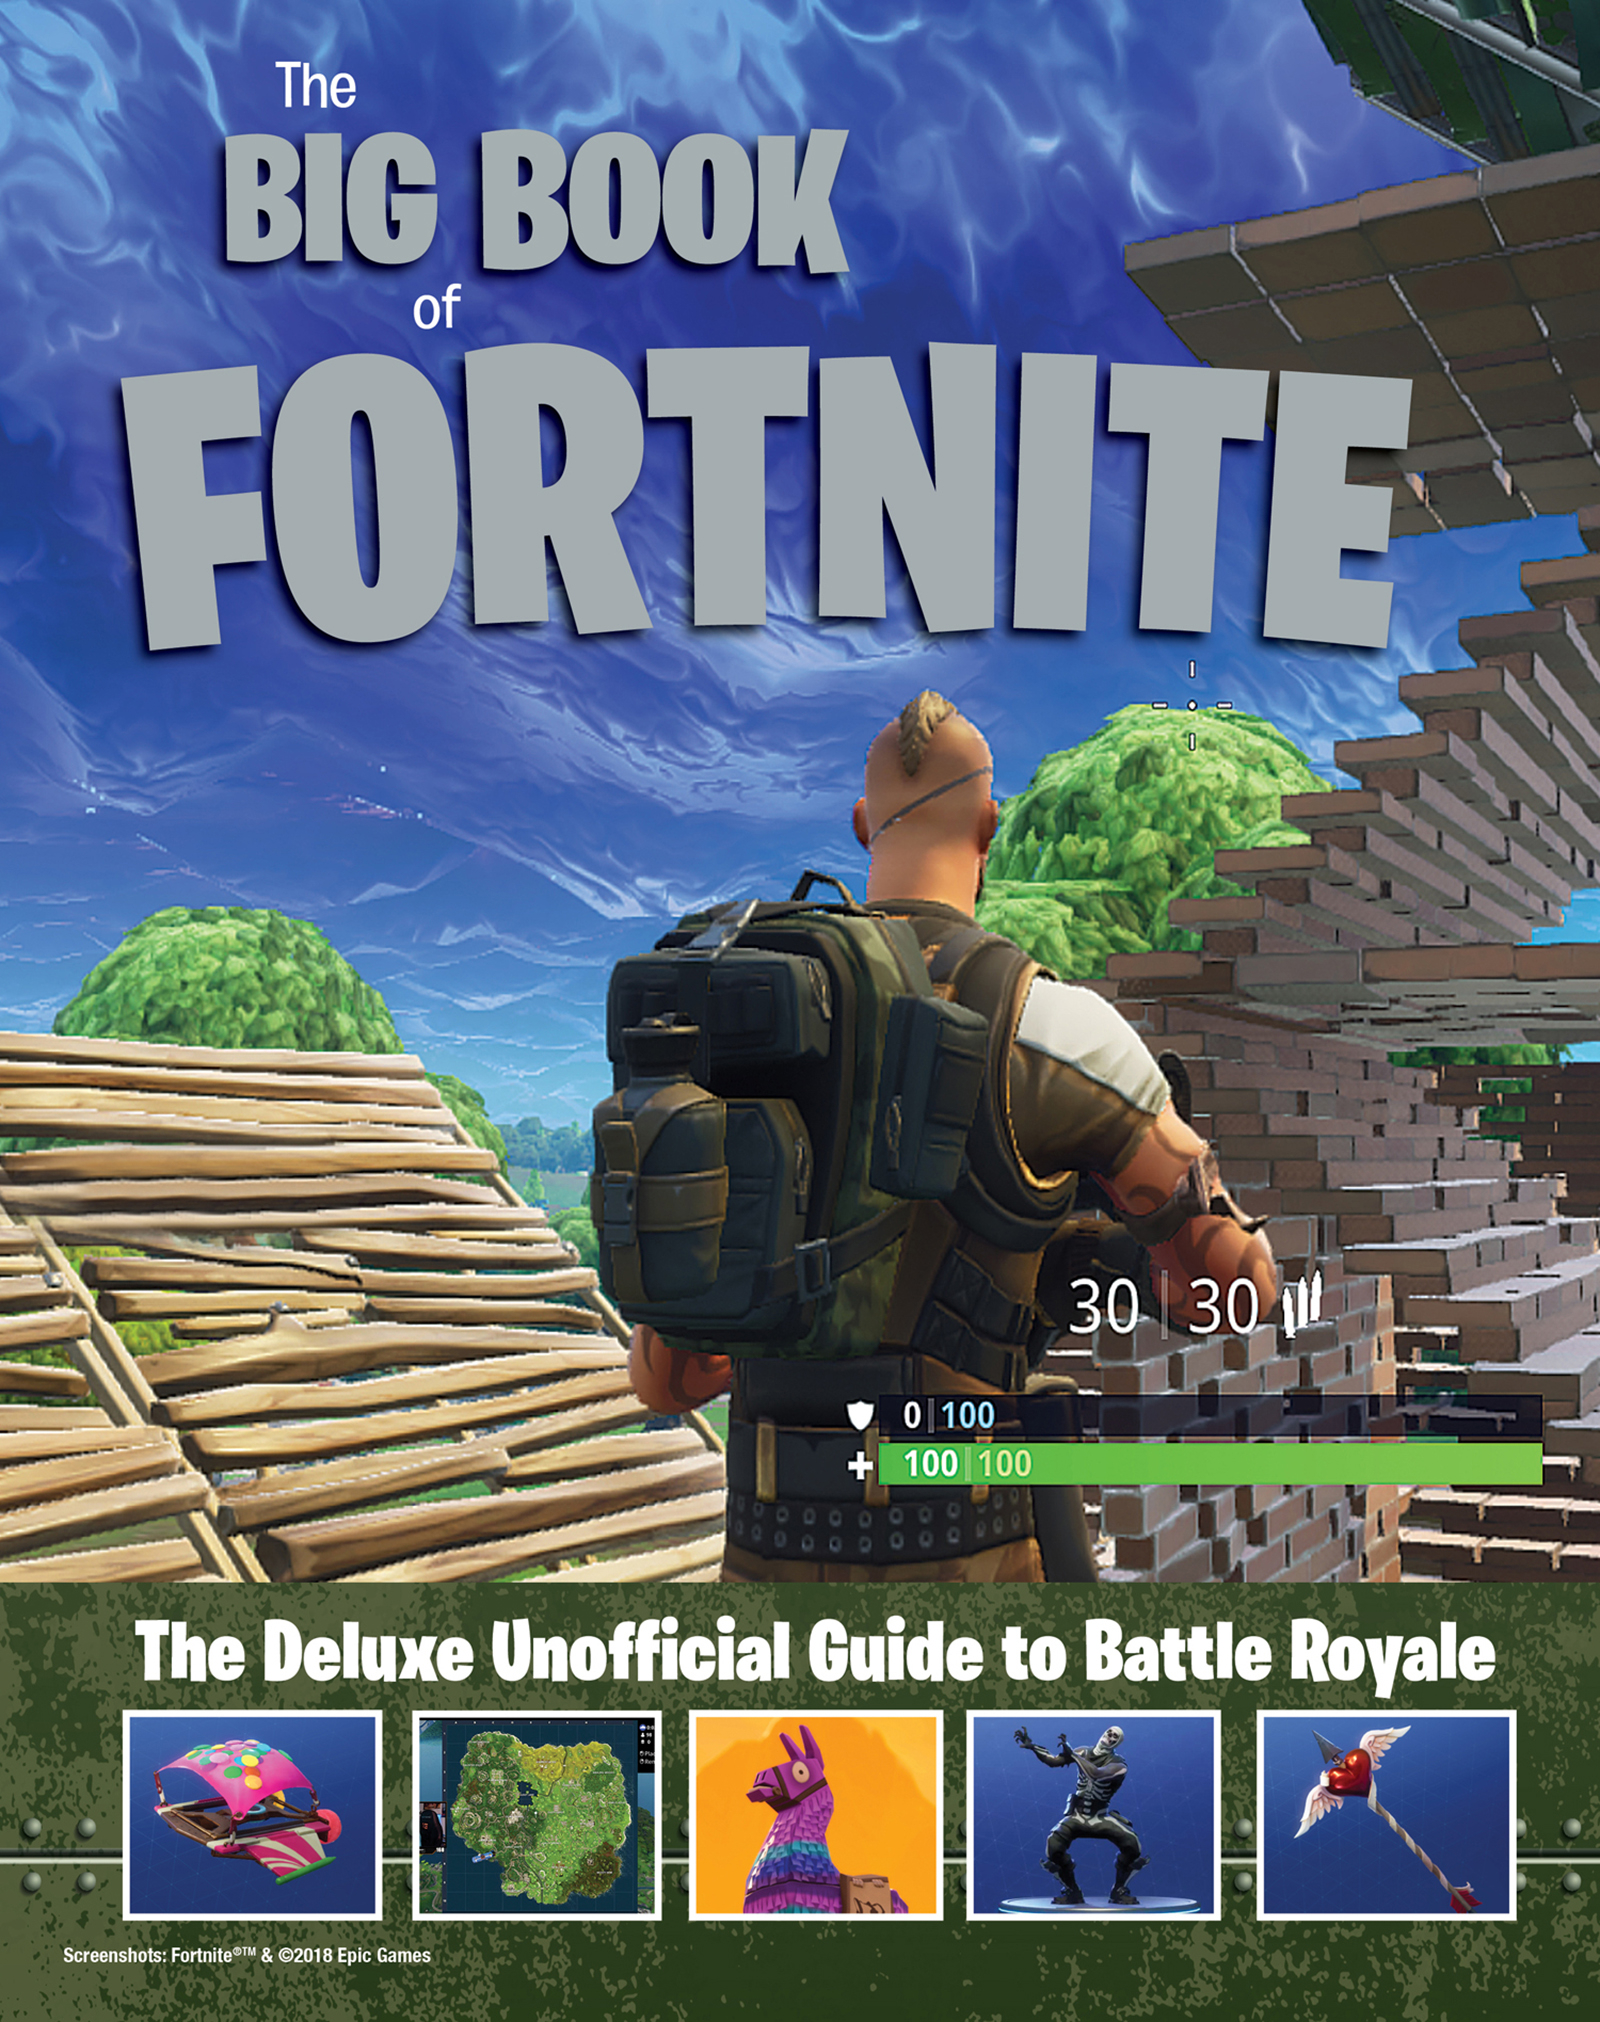 The Big Book Of Fortnite By Books Triumph Ebook - the advanced roblox coding book an unofficial guide ebook by